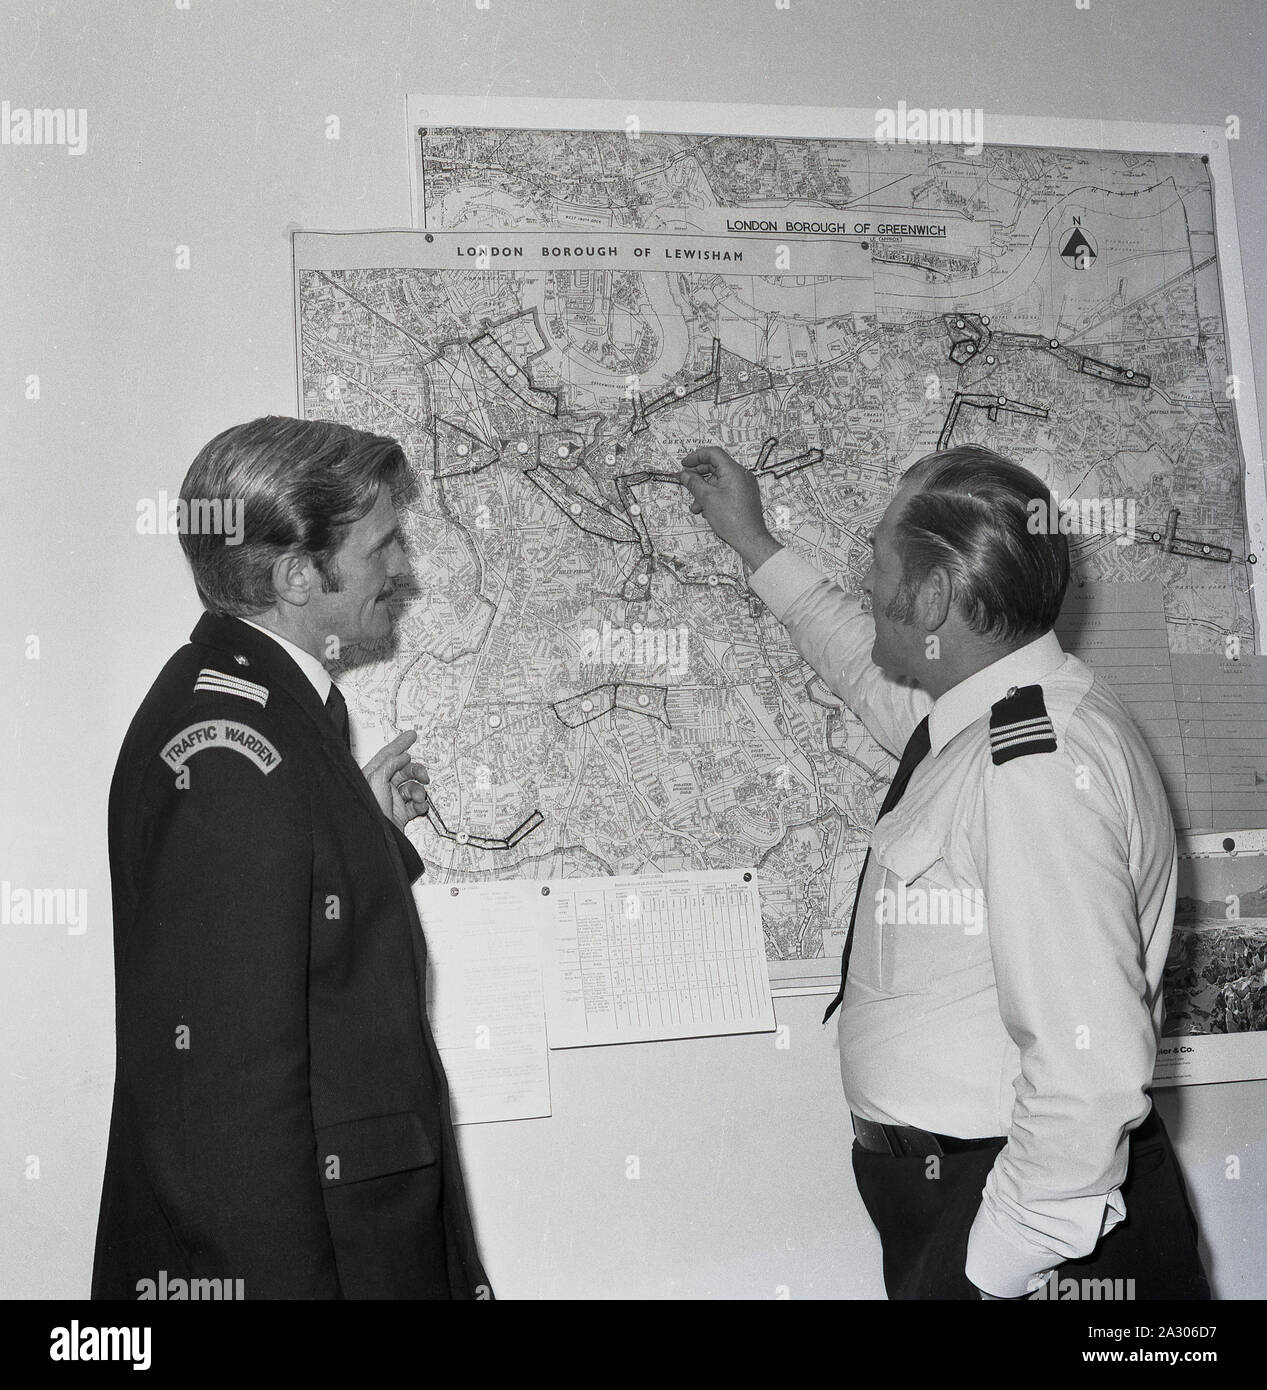 1972, historical, a newly recruited uniformed male traffic warden being shown his street area on a map on a wall by his senior officer, Lewisham, London, England, UK. Parking enforcement began in Britain in September 1960 when the first traffic wardens appeared on the streets of Westminster to issue fines to motorists on behalf of the Metropolitan Police. Stock Photo